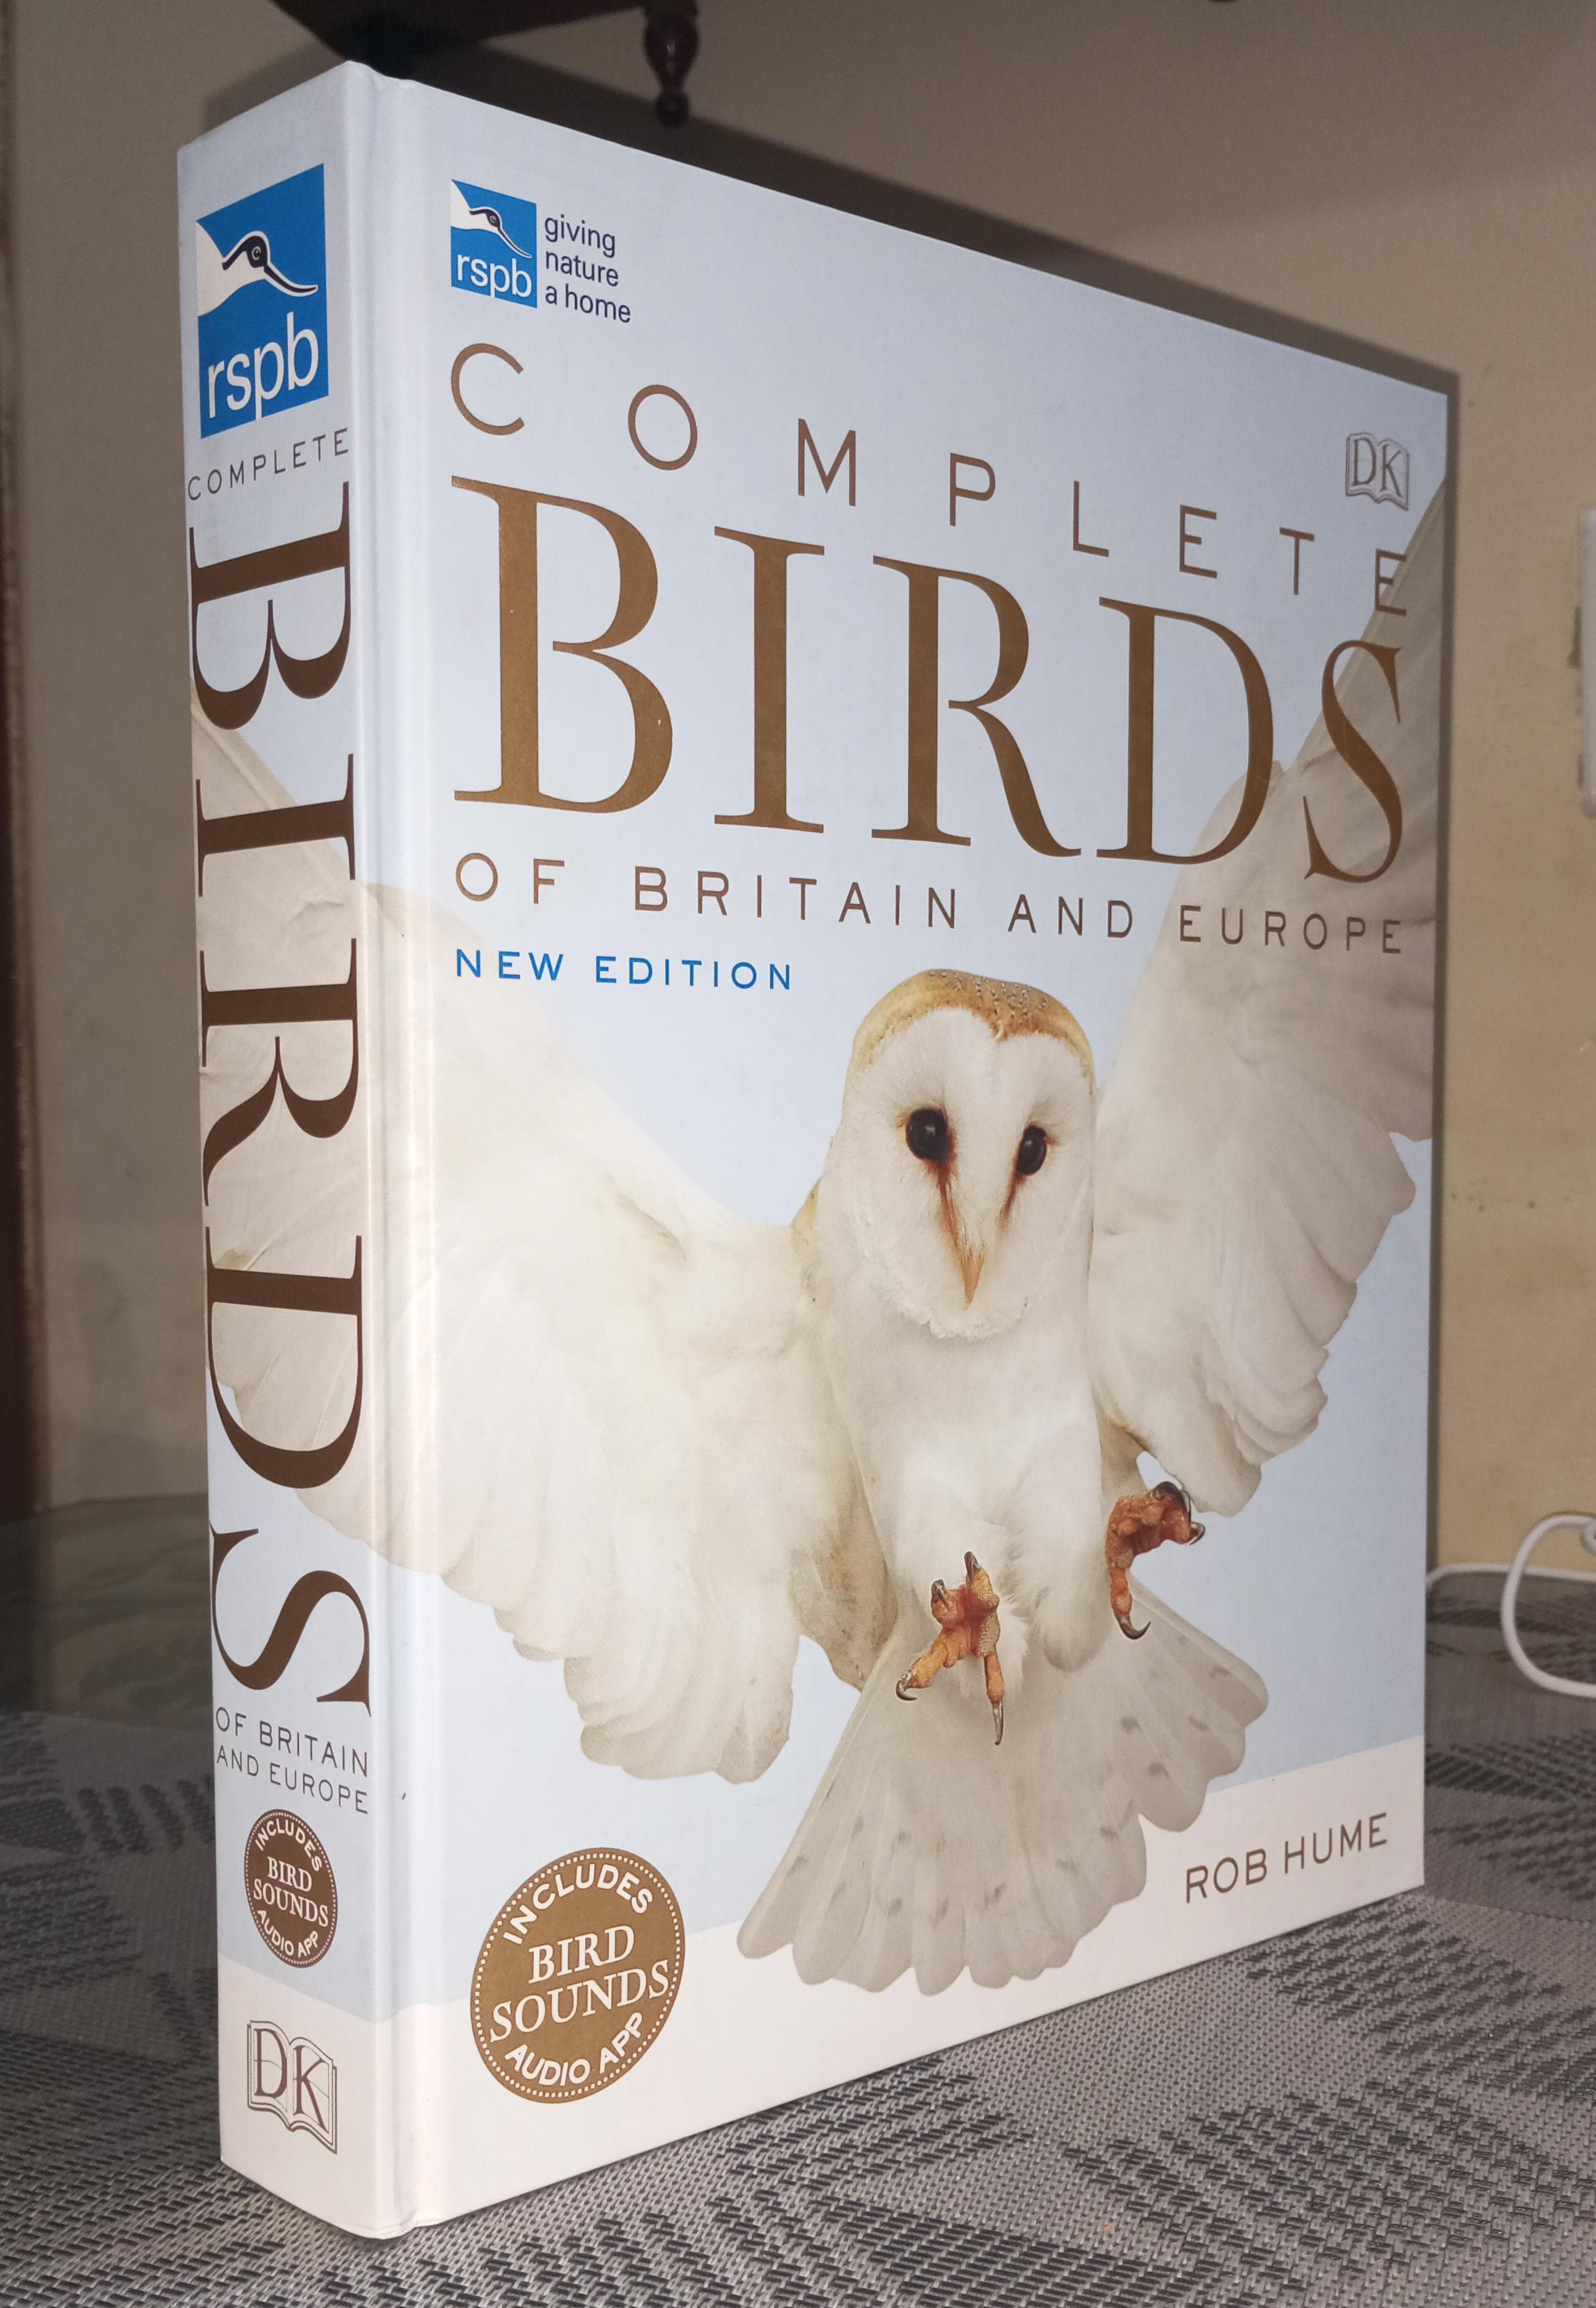 birds of britain original hard cover brand new large size... with dust cover